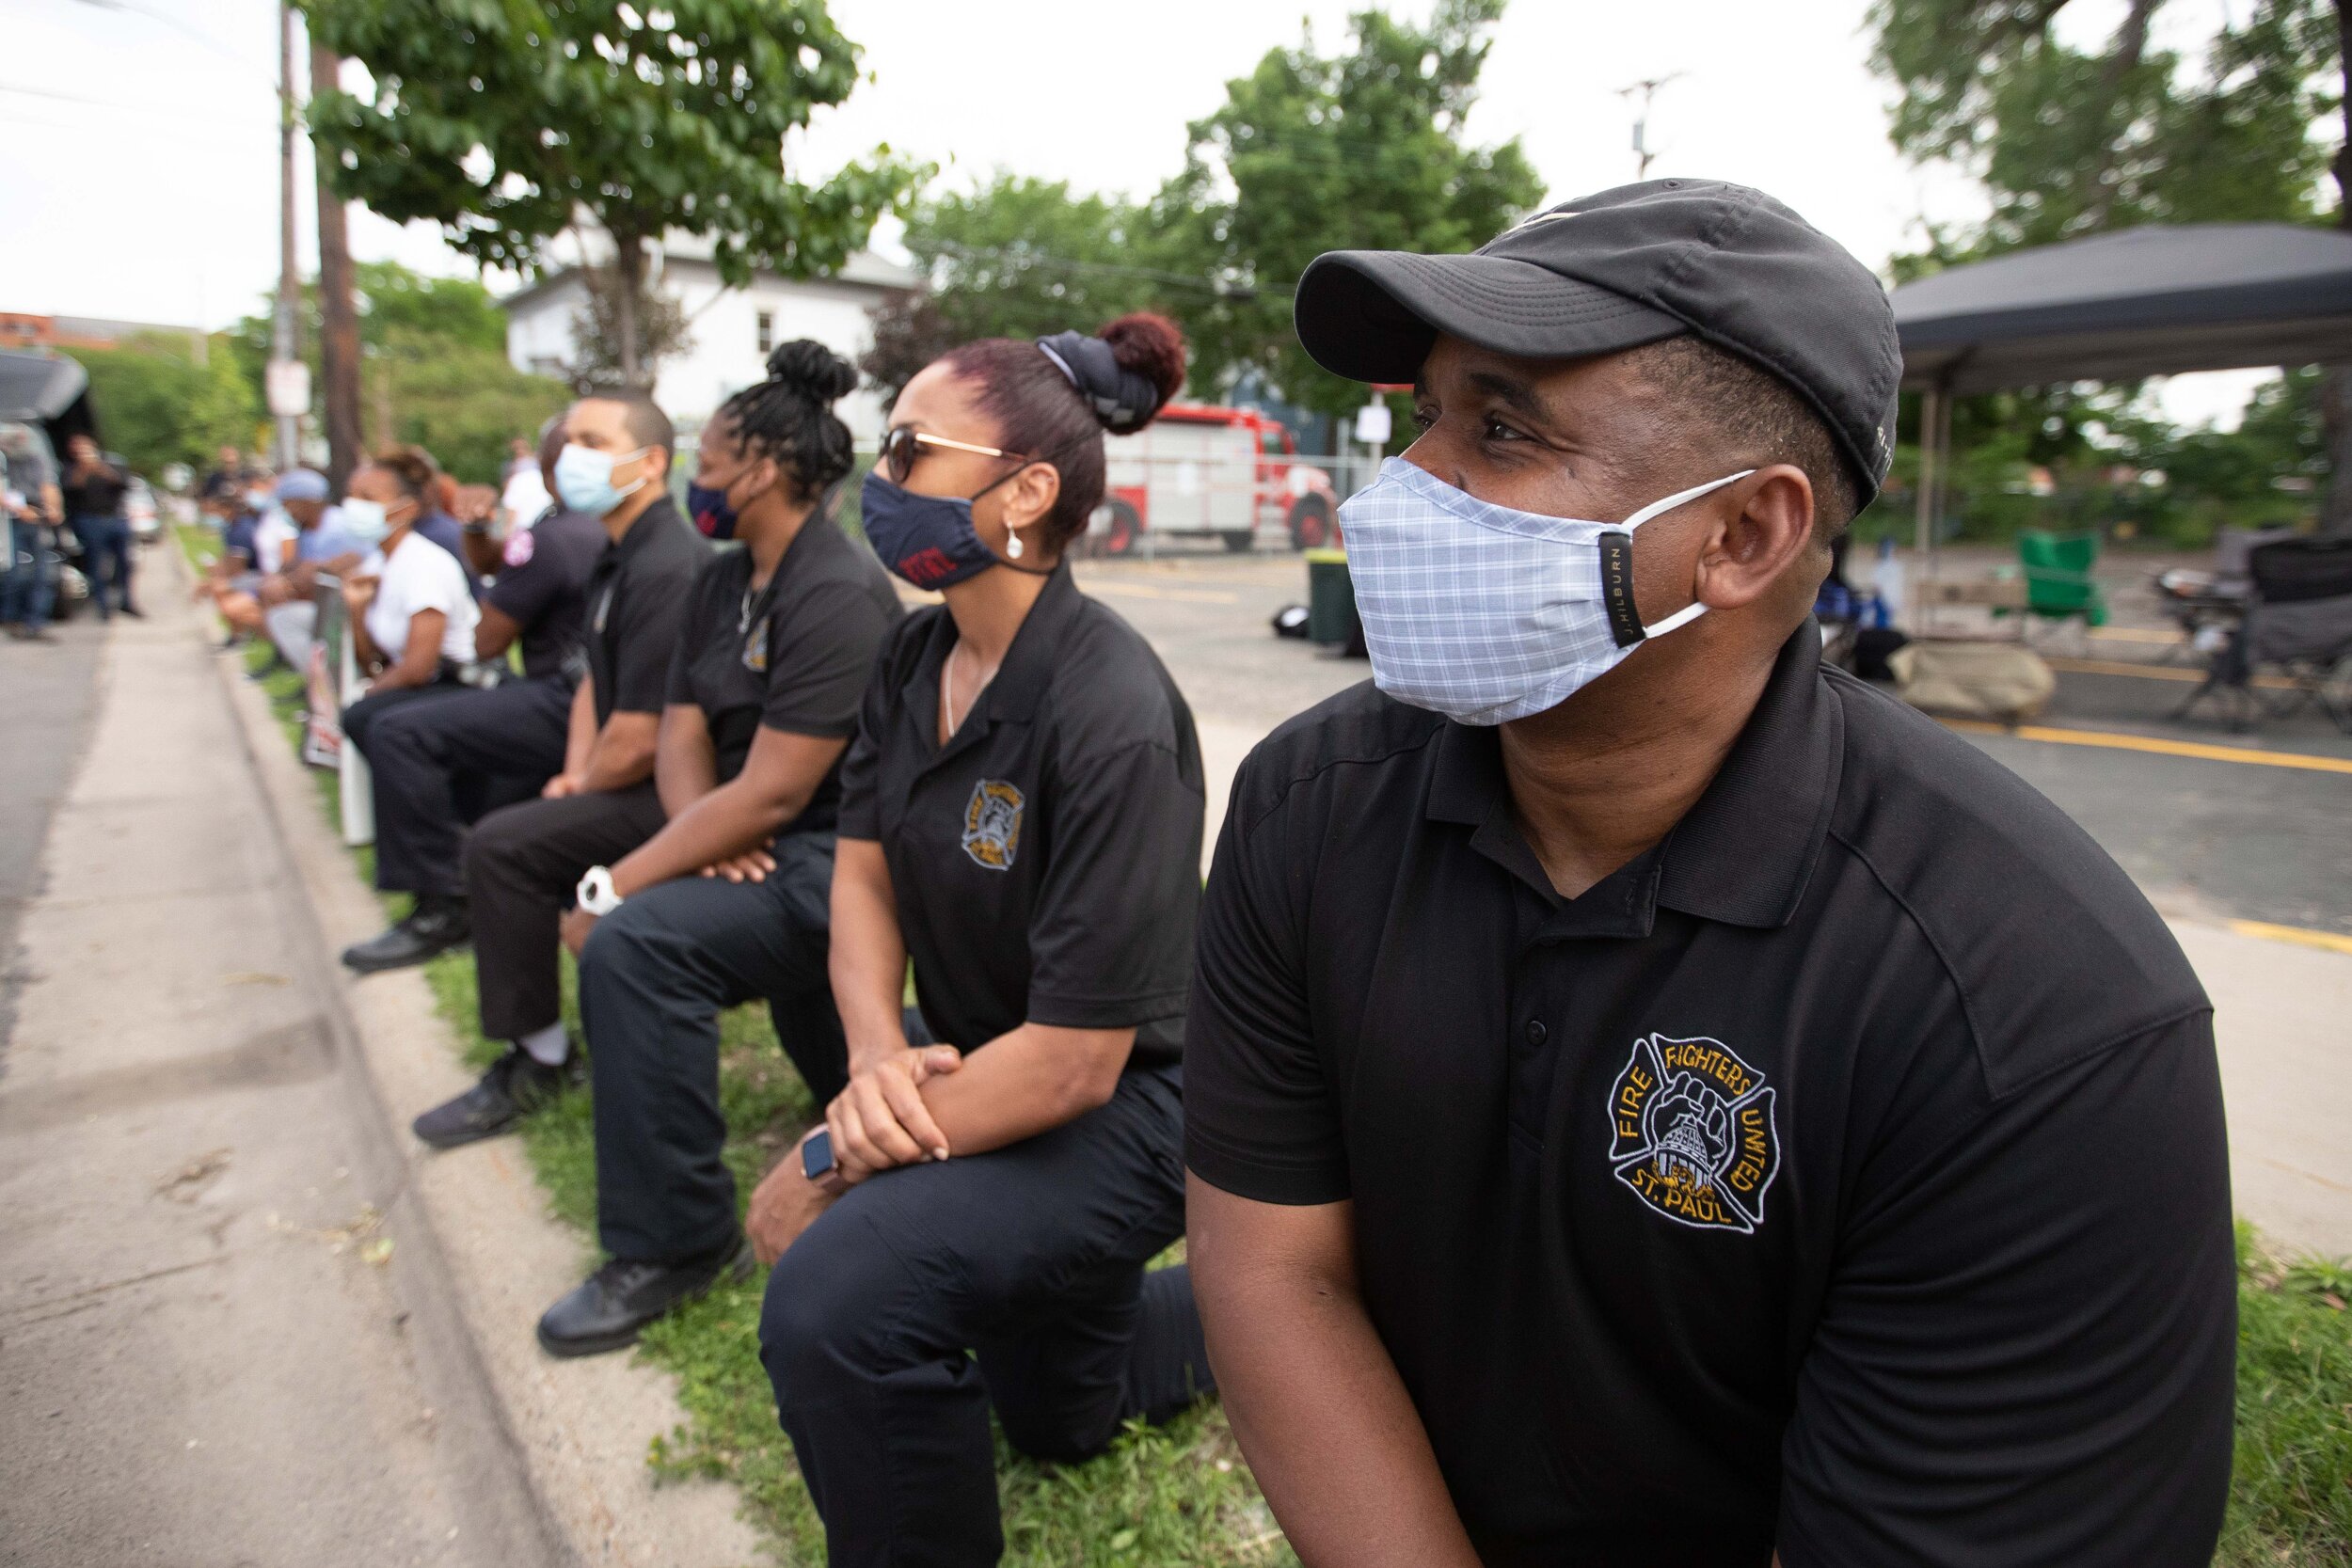  Firefighters take a knee in honor of George Floyd as the hearse containing his casket drives by at a memorial for George at North Central University on Jun 4, 2020. 